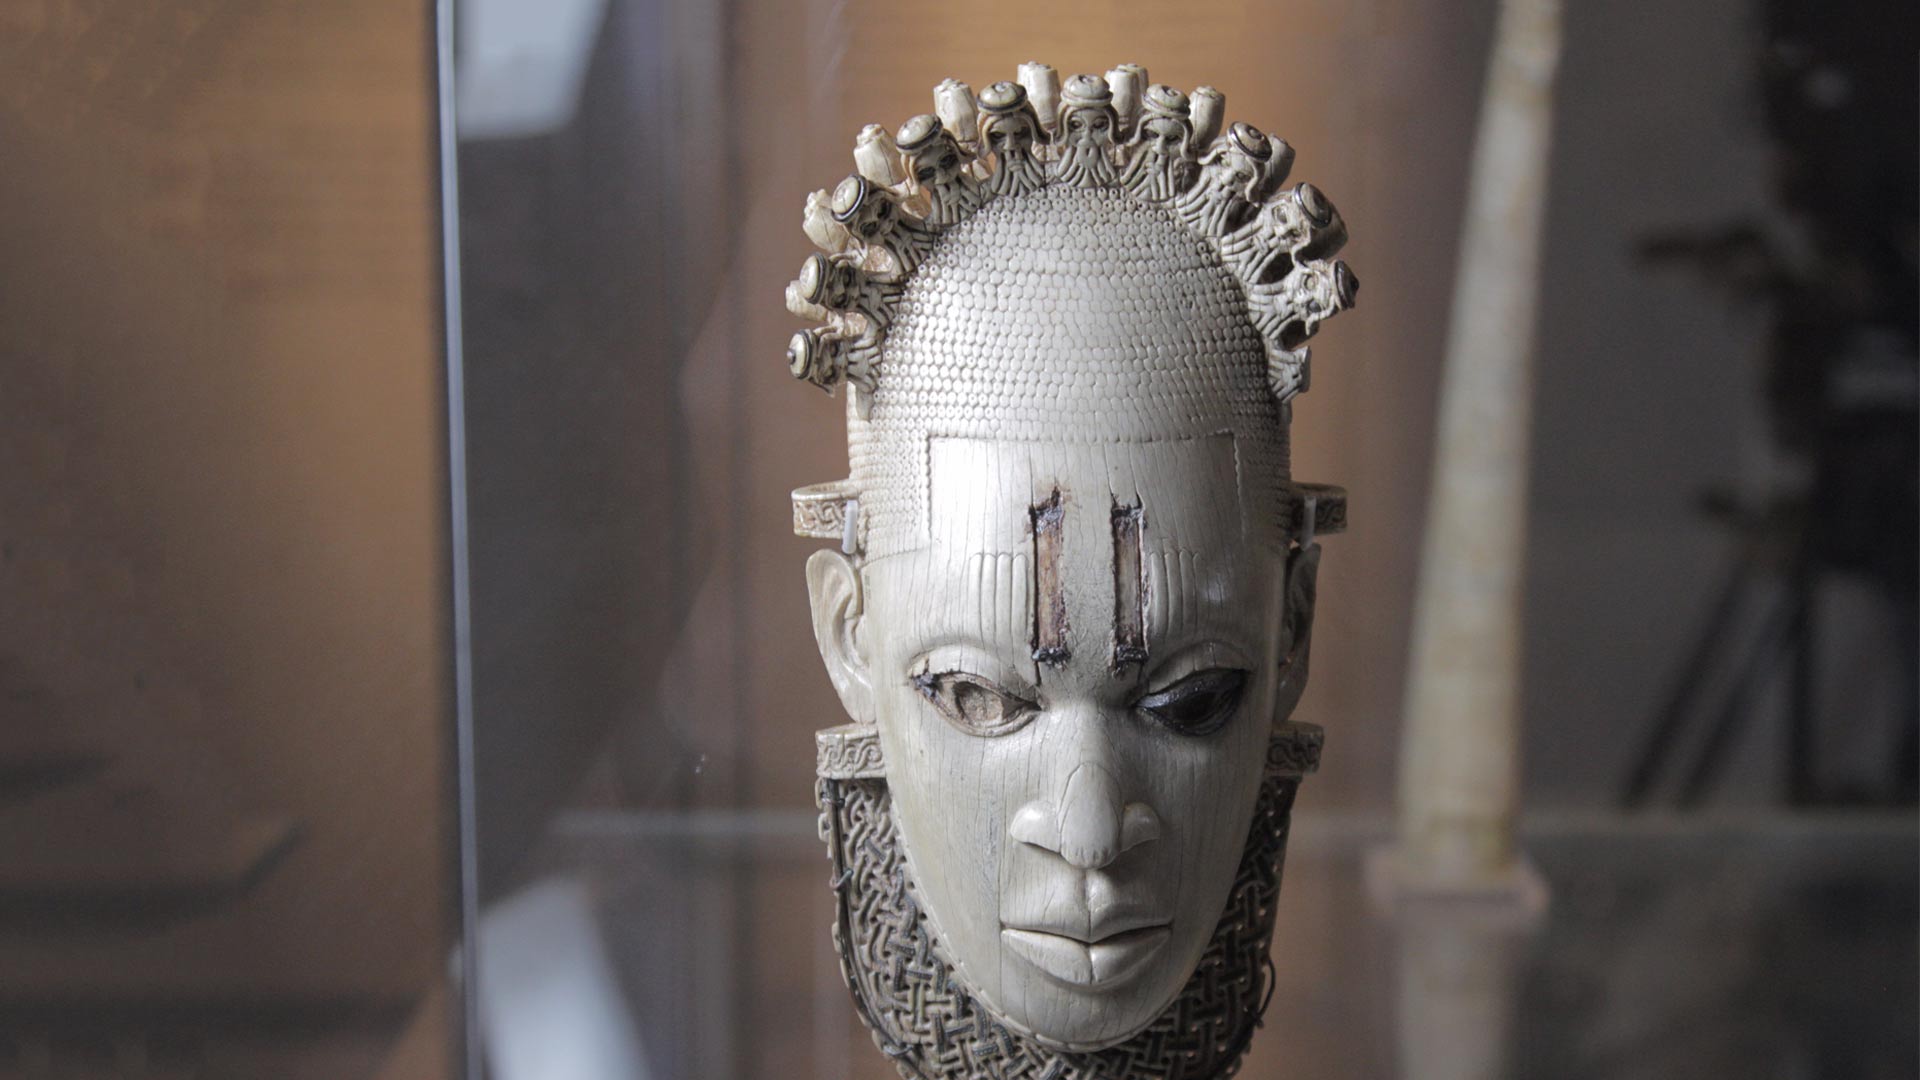 Carved Ivory mask-shaped hip pendant, inlaid with bronze Benin, Queen Idia, Artisit Unknown (16th century) – British Museum, London.